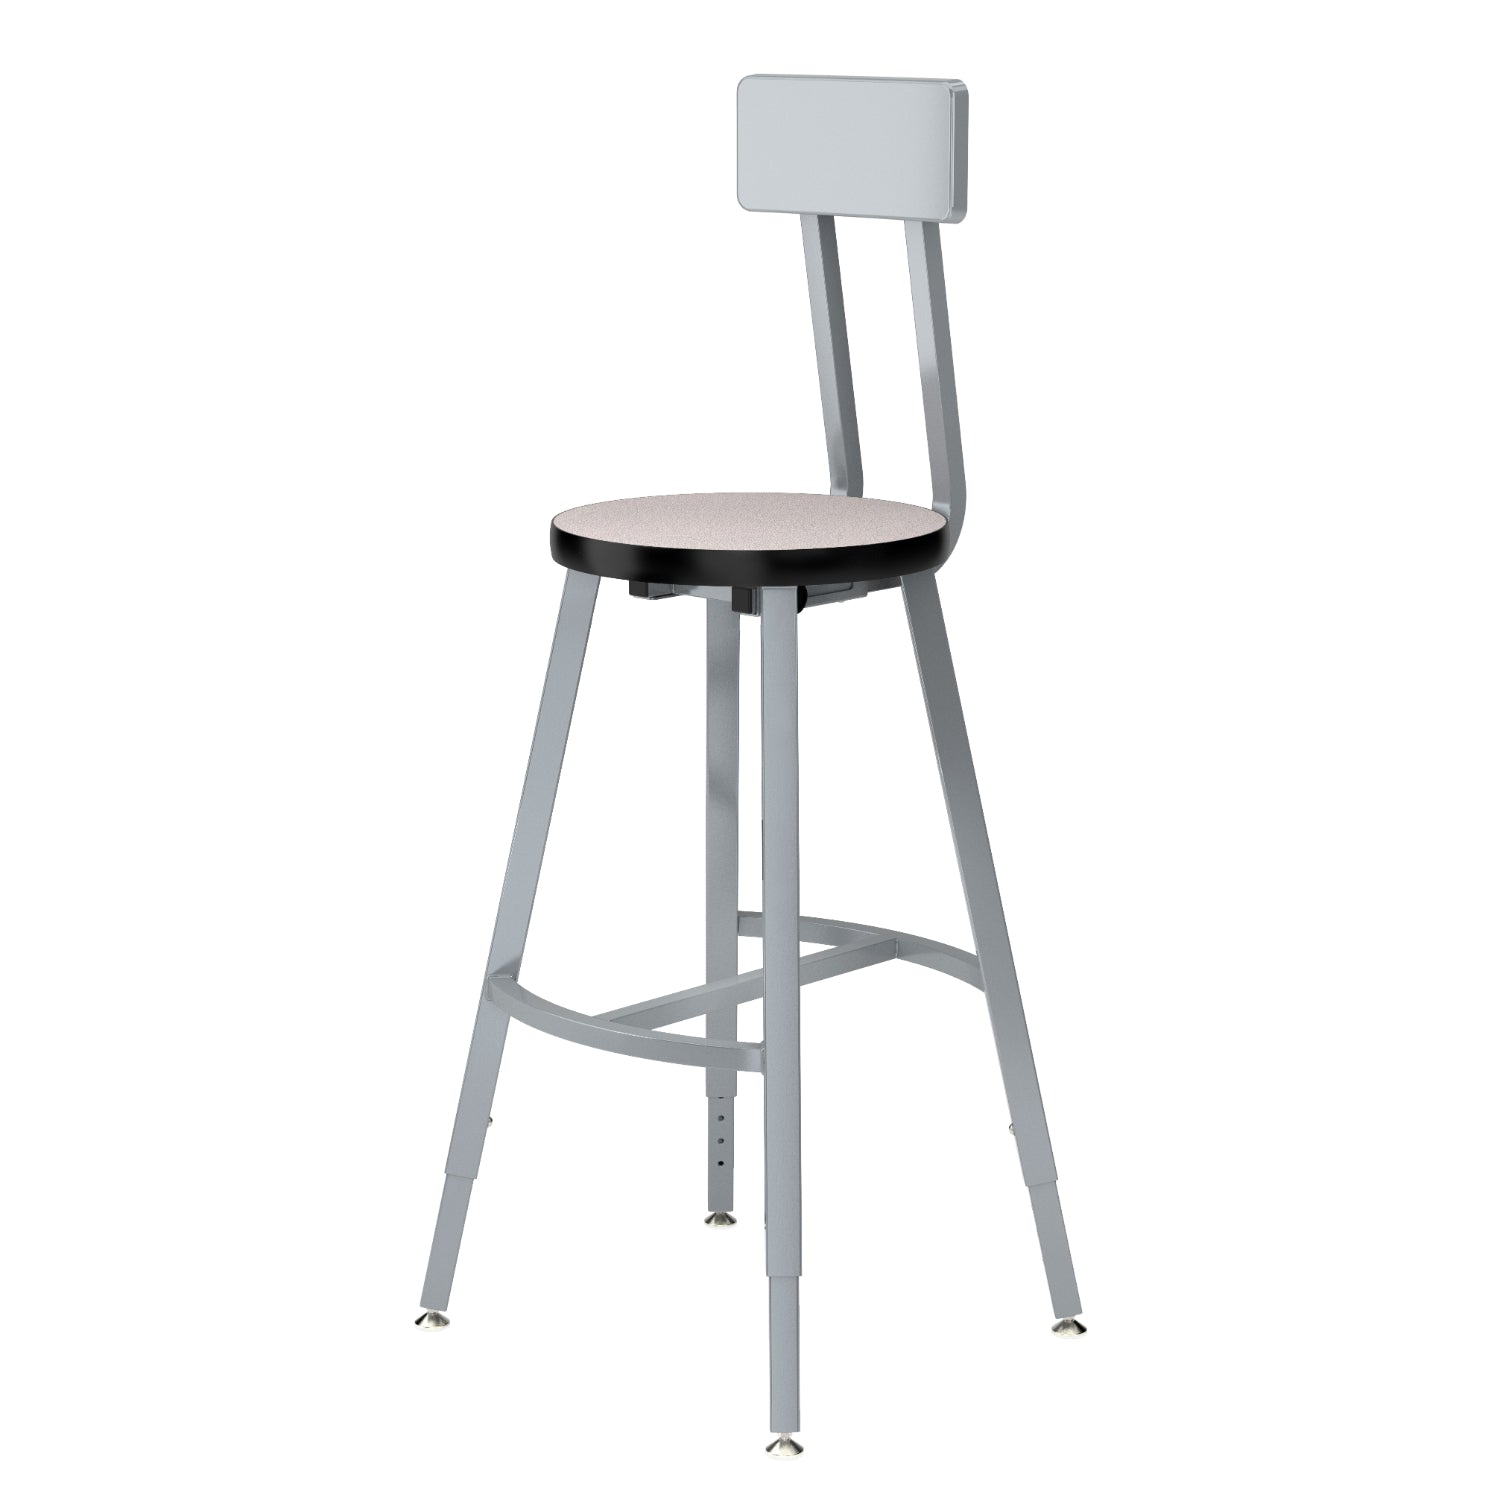 Titan Adjustable Height Stool with Backrest, Laminate Seat with MDF Core/ProtectEdge, 24-32" Seat Height